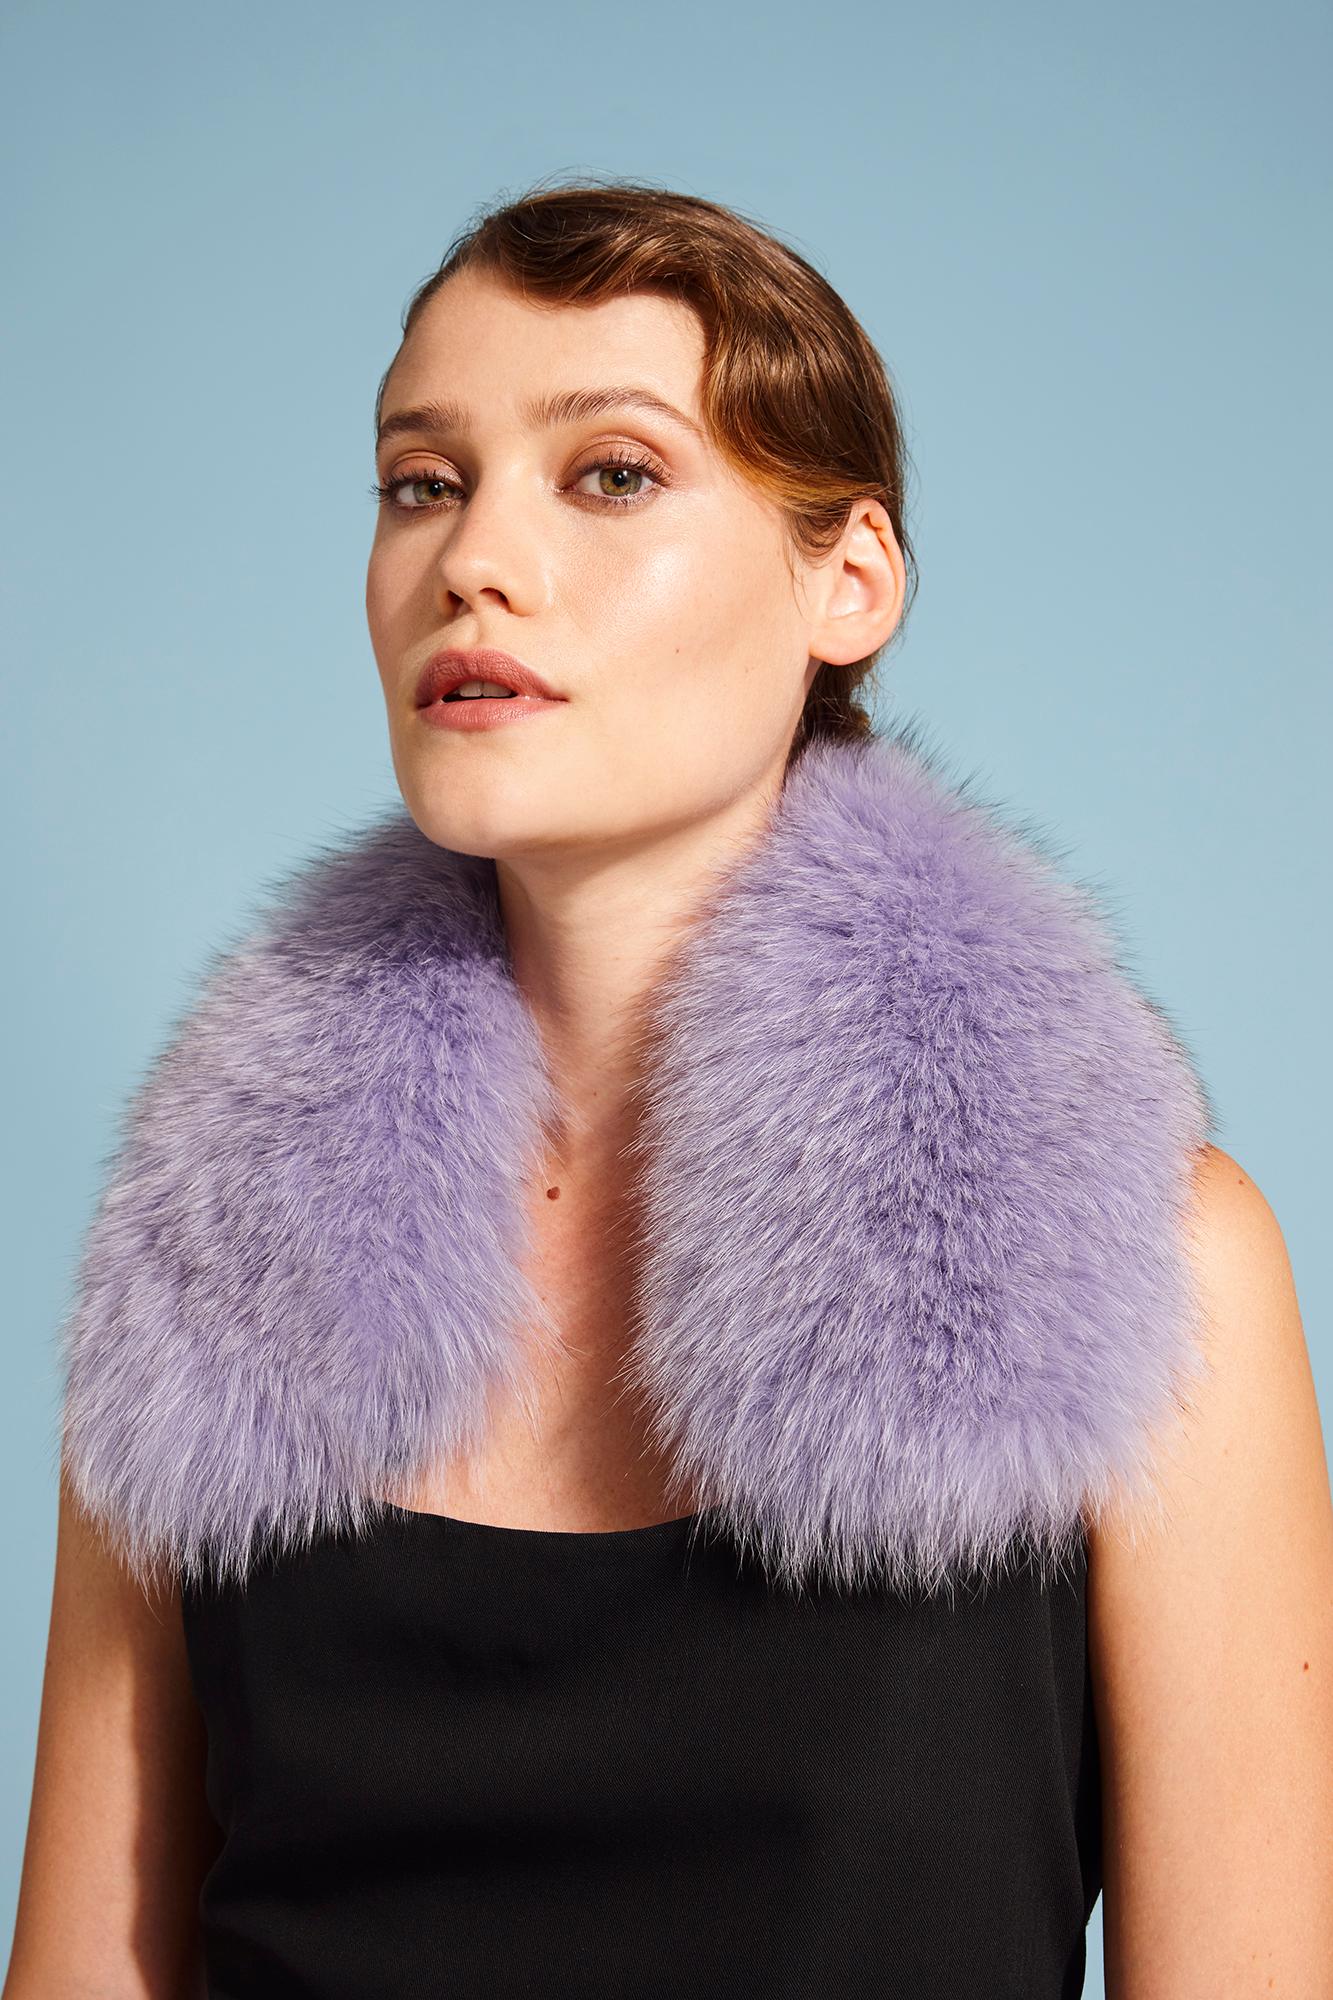 Verheyen London Peter Pan Collar in Lilac Fox Fur and lined in silk 

The Peter Pan collar is Verheyen London’s classic staple for effortless style for casual wear.

To throw over your favourite knit or leather jacket.

PRODUCT DETAILS

The Peter